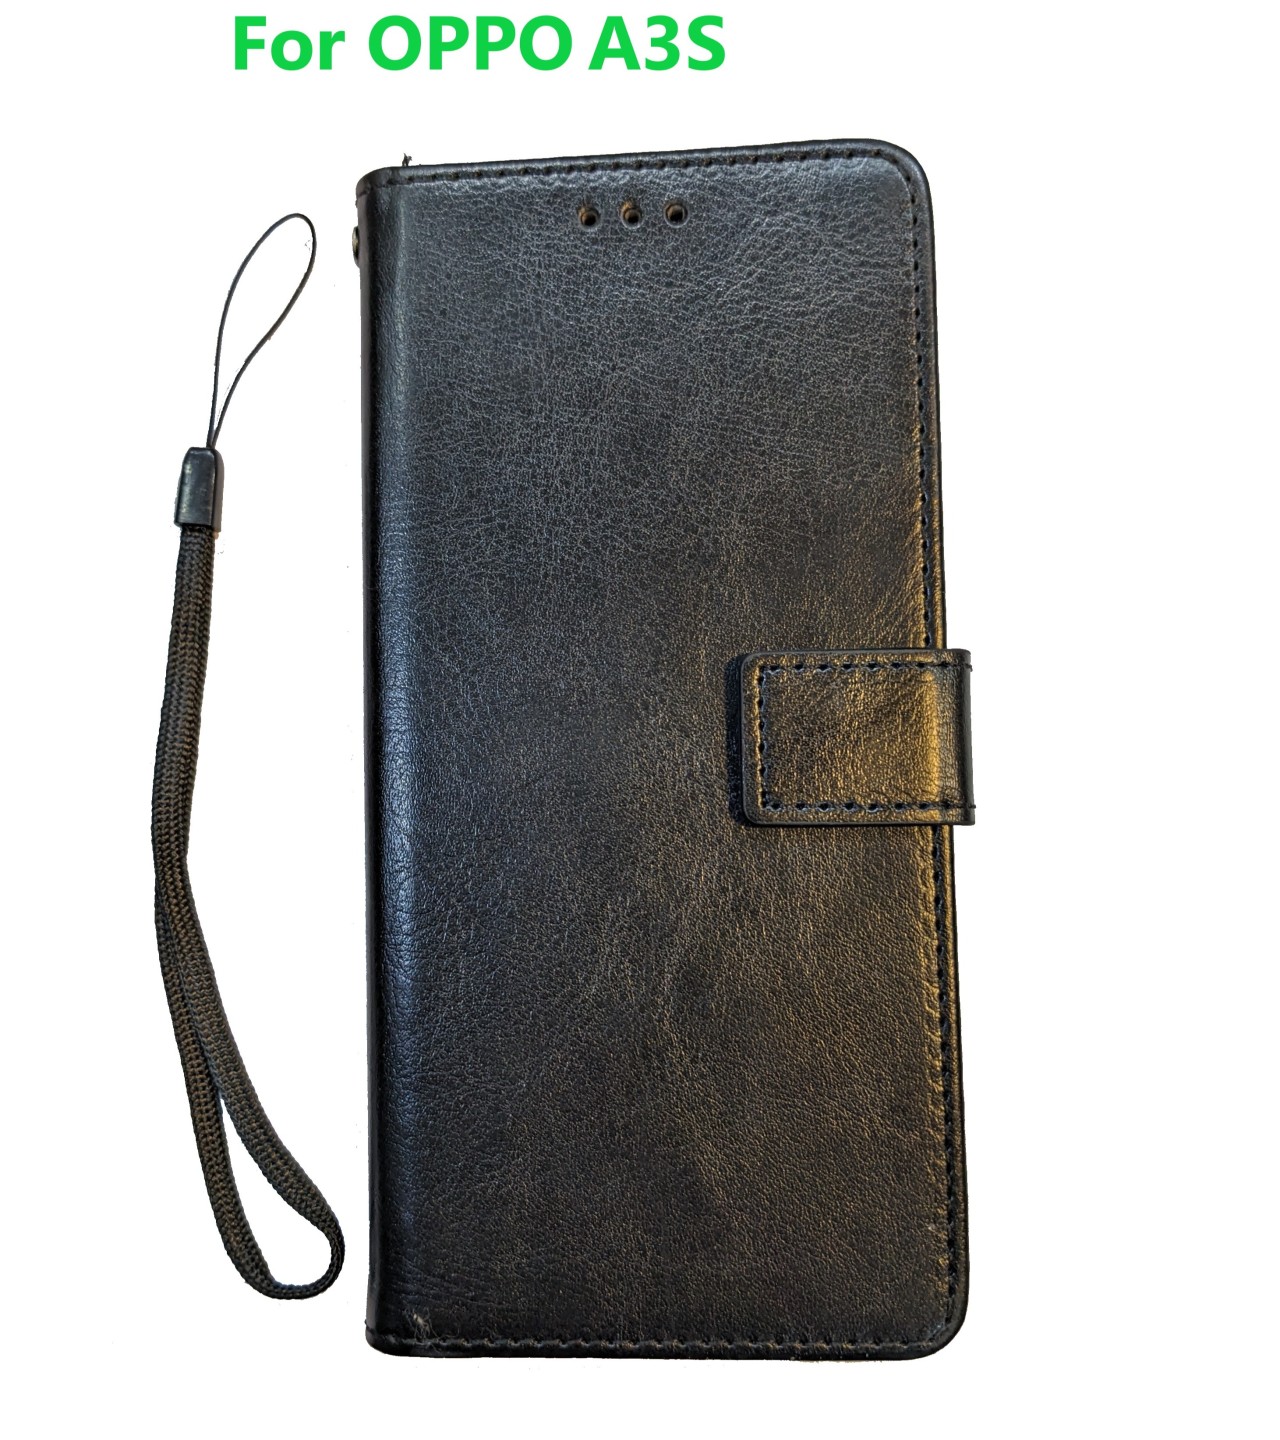 Flip book Wallet Leather OPPO A3S Case with magnetic layer